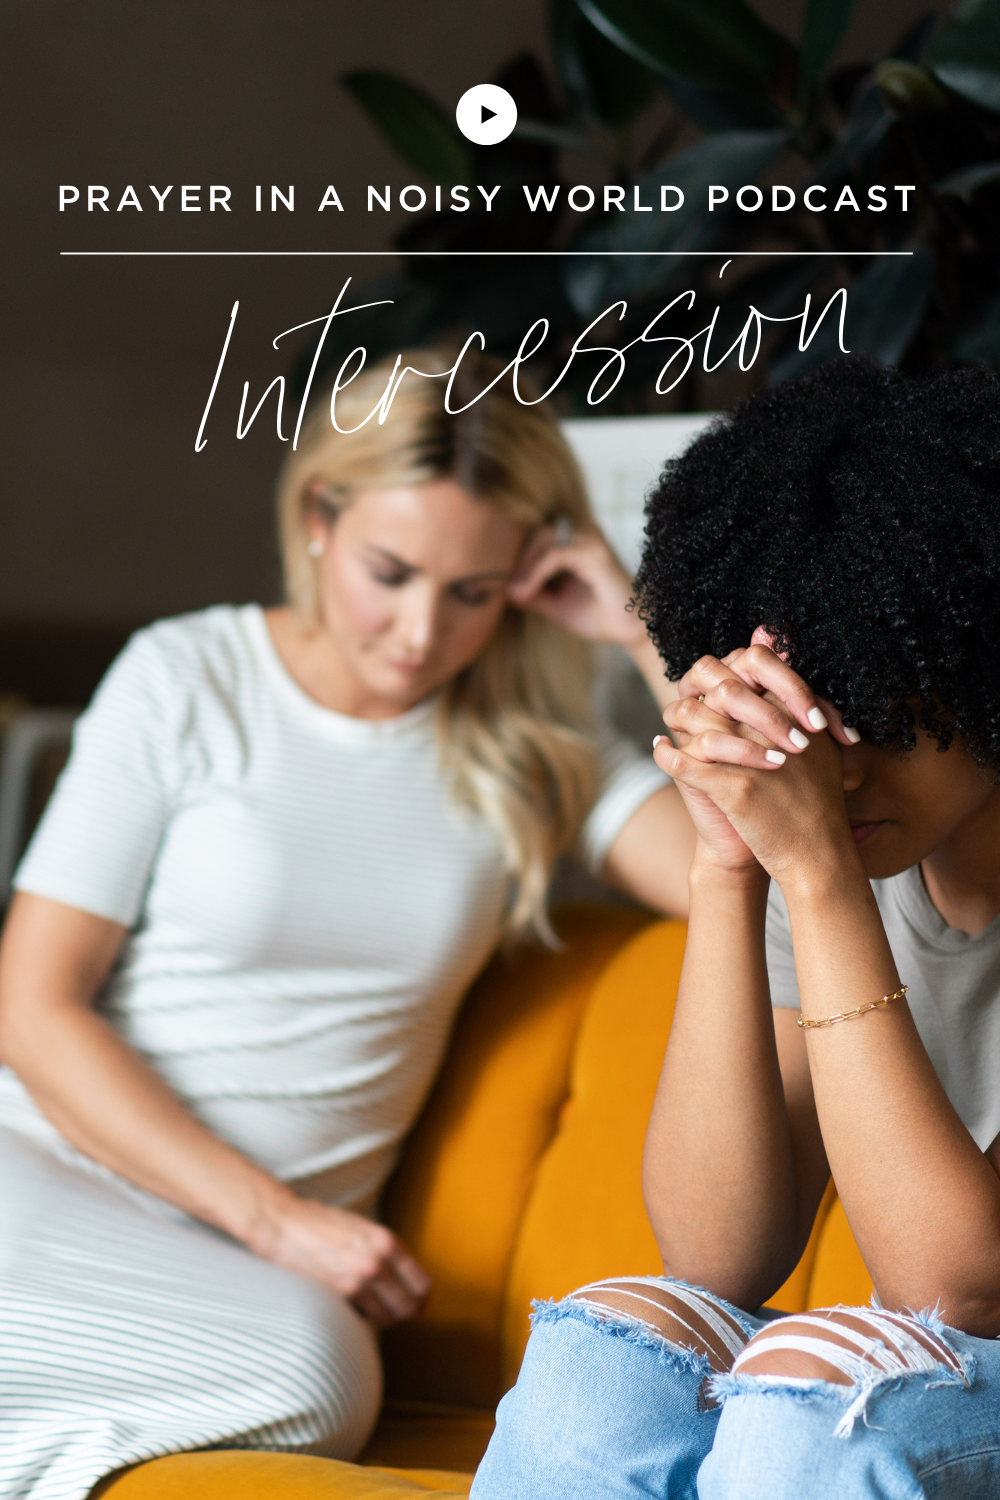 On the Podcast: Intercession by Valerie Woerner, prayer journal, women's ministry, prayer, refresh, meditation, how to make a prayer journal, praying for your kids, husband, prayer warrior, war room, Bible study, tools, prayer notebook, how to pray, prayer in a noisy world, bible, praying scripture, intercession, praying for others